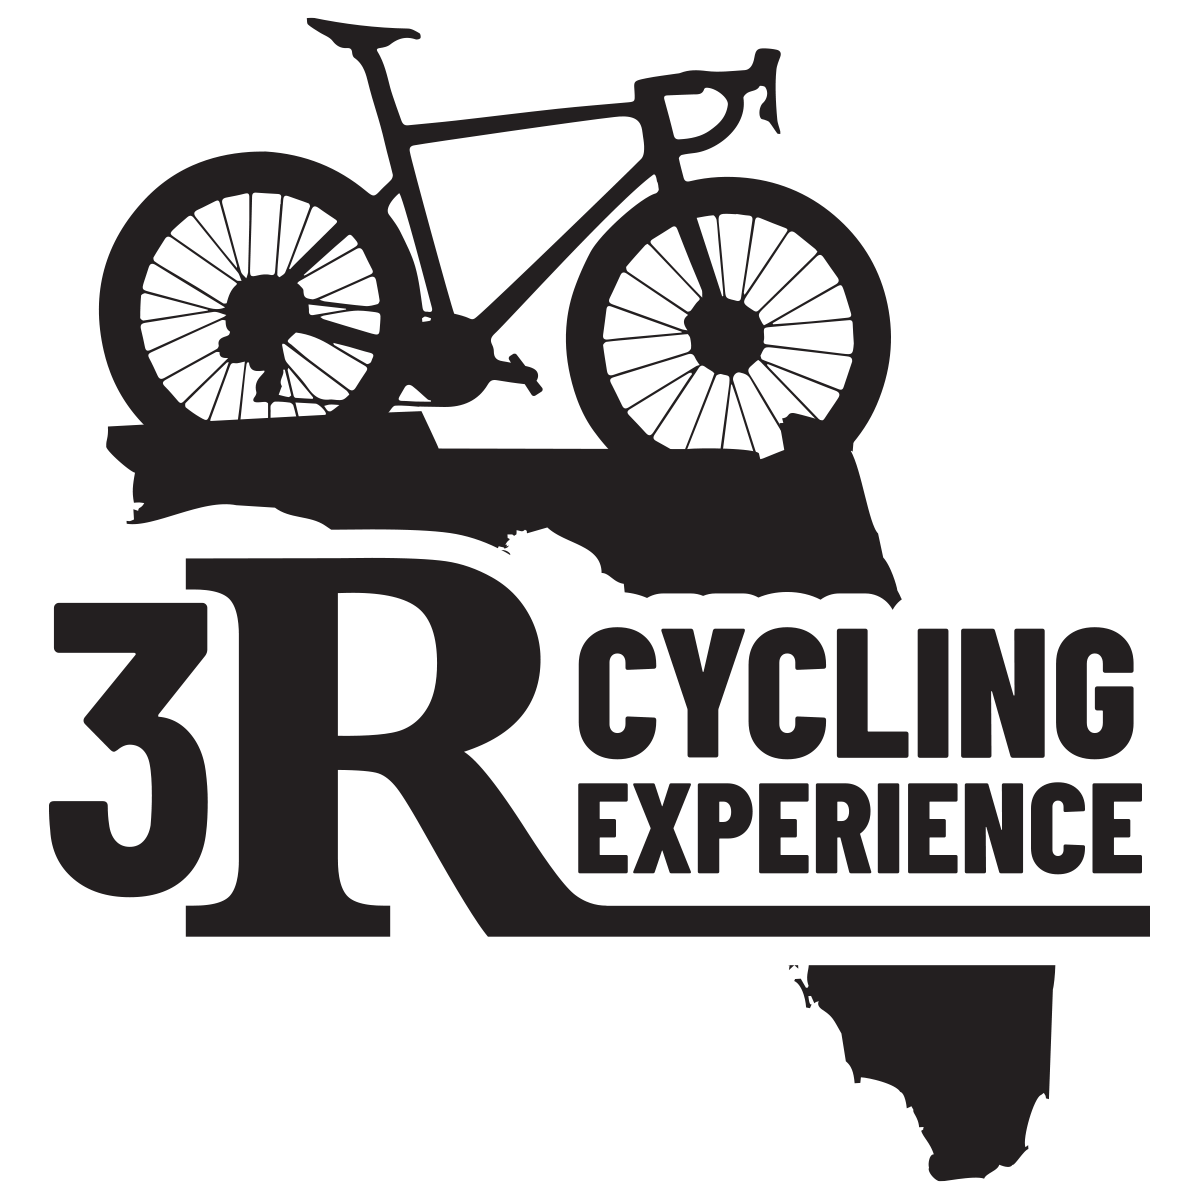 3R Cycling Experience